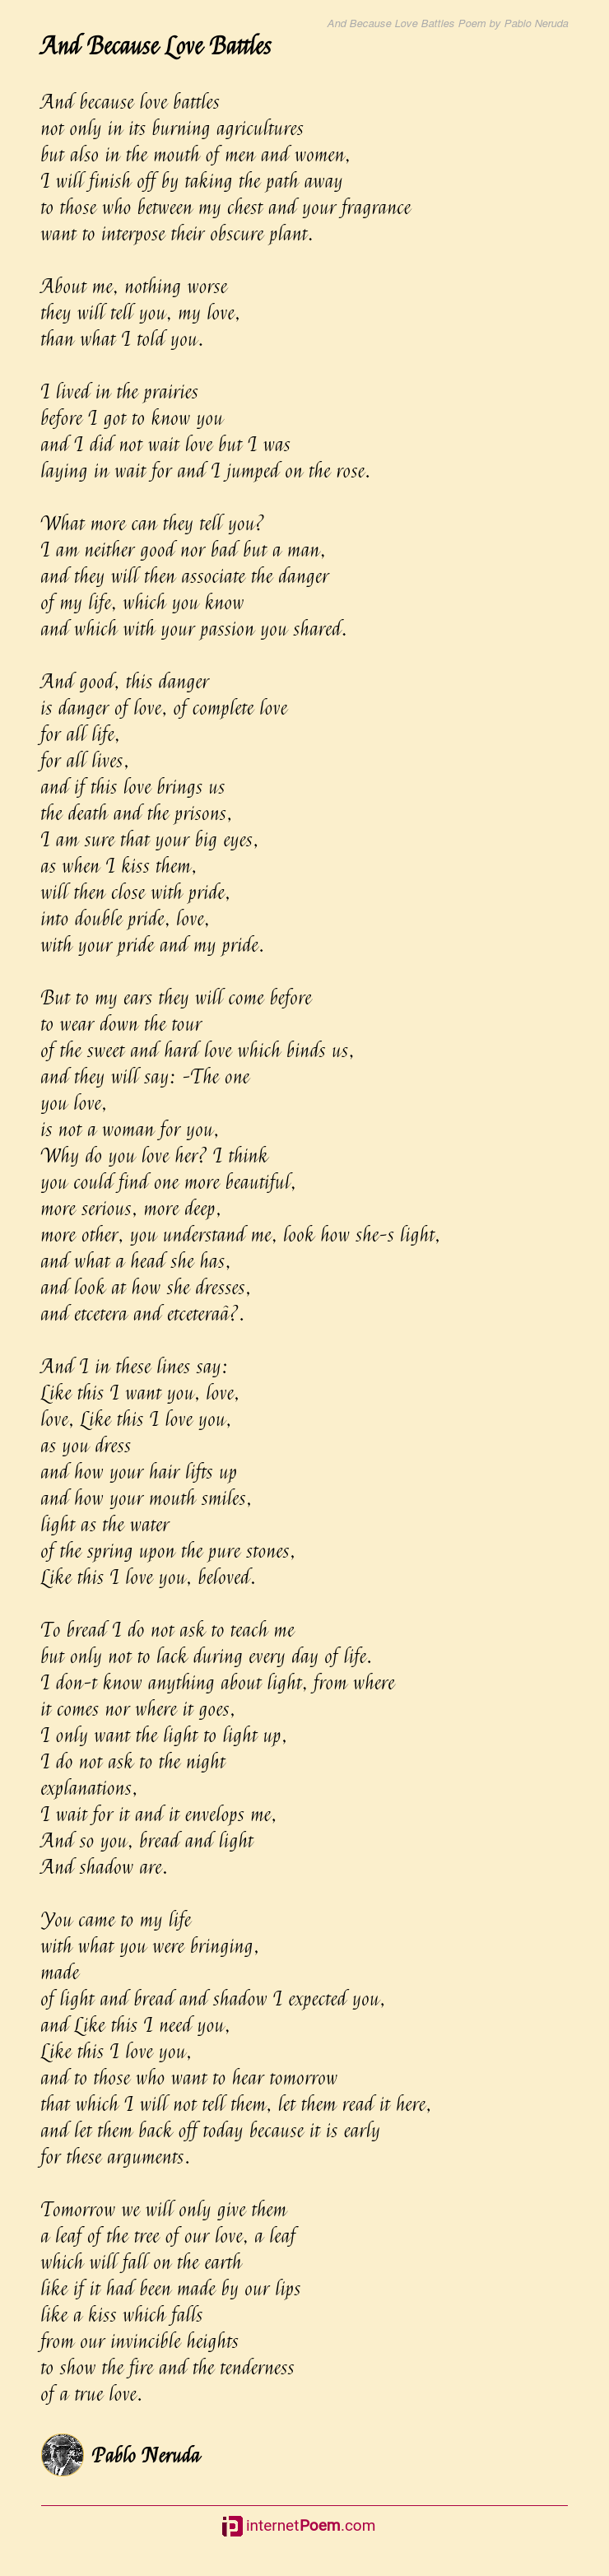 And Because Love Battles Poem By Pablo Neruda